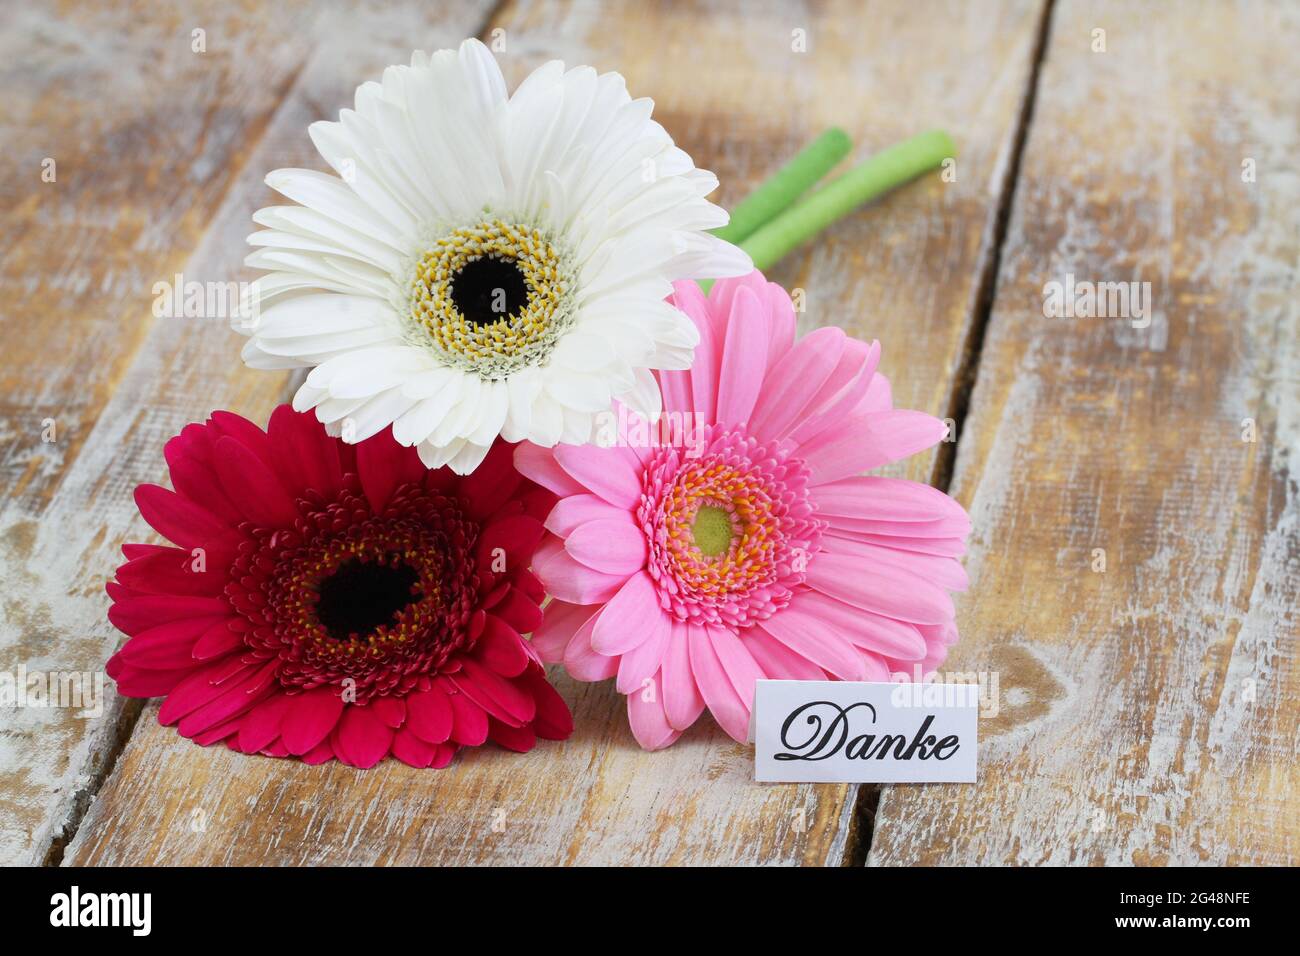 Danke (thank you in German) card with three pink and white gerbera daisies on rustic wooden surface Stock Photo